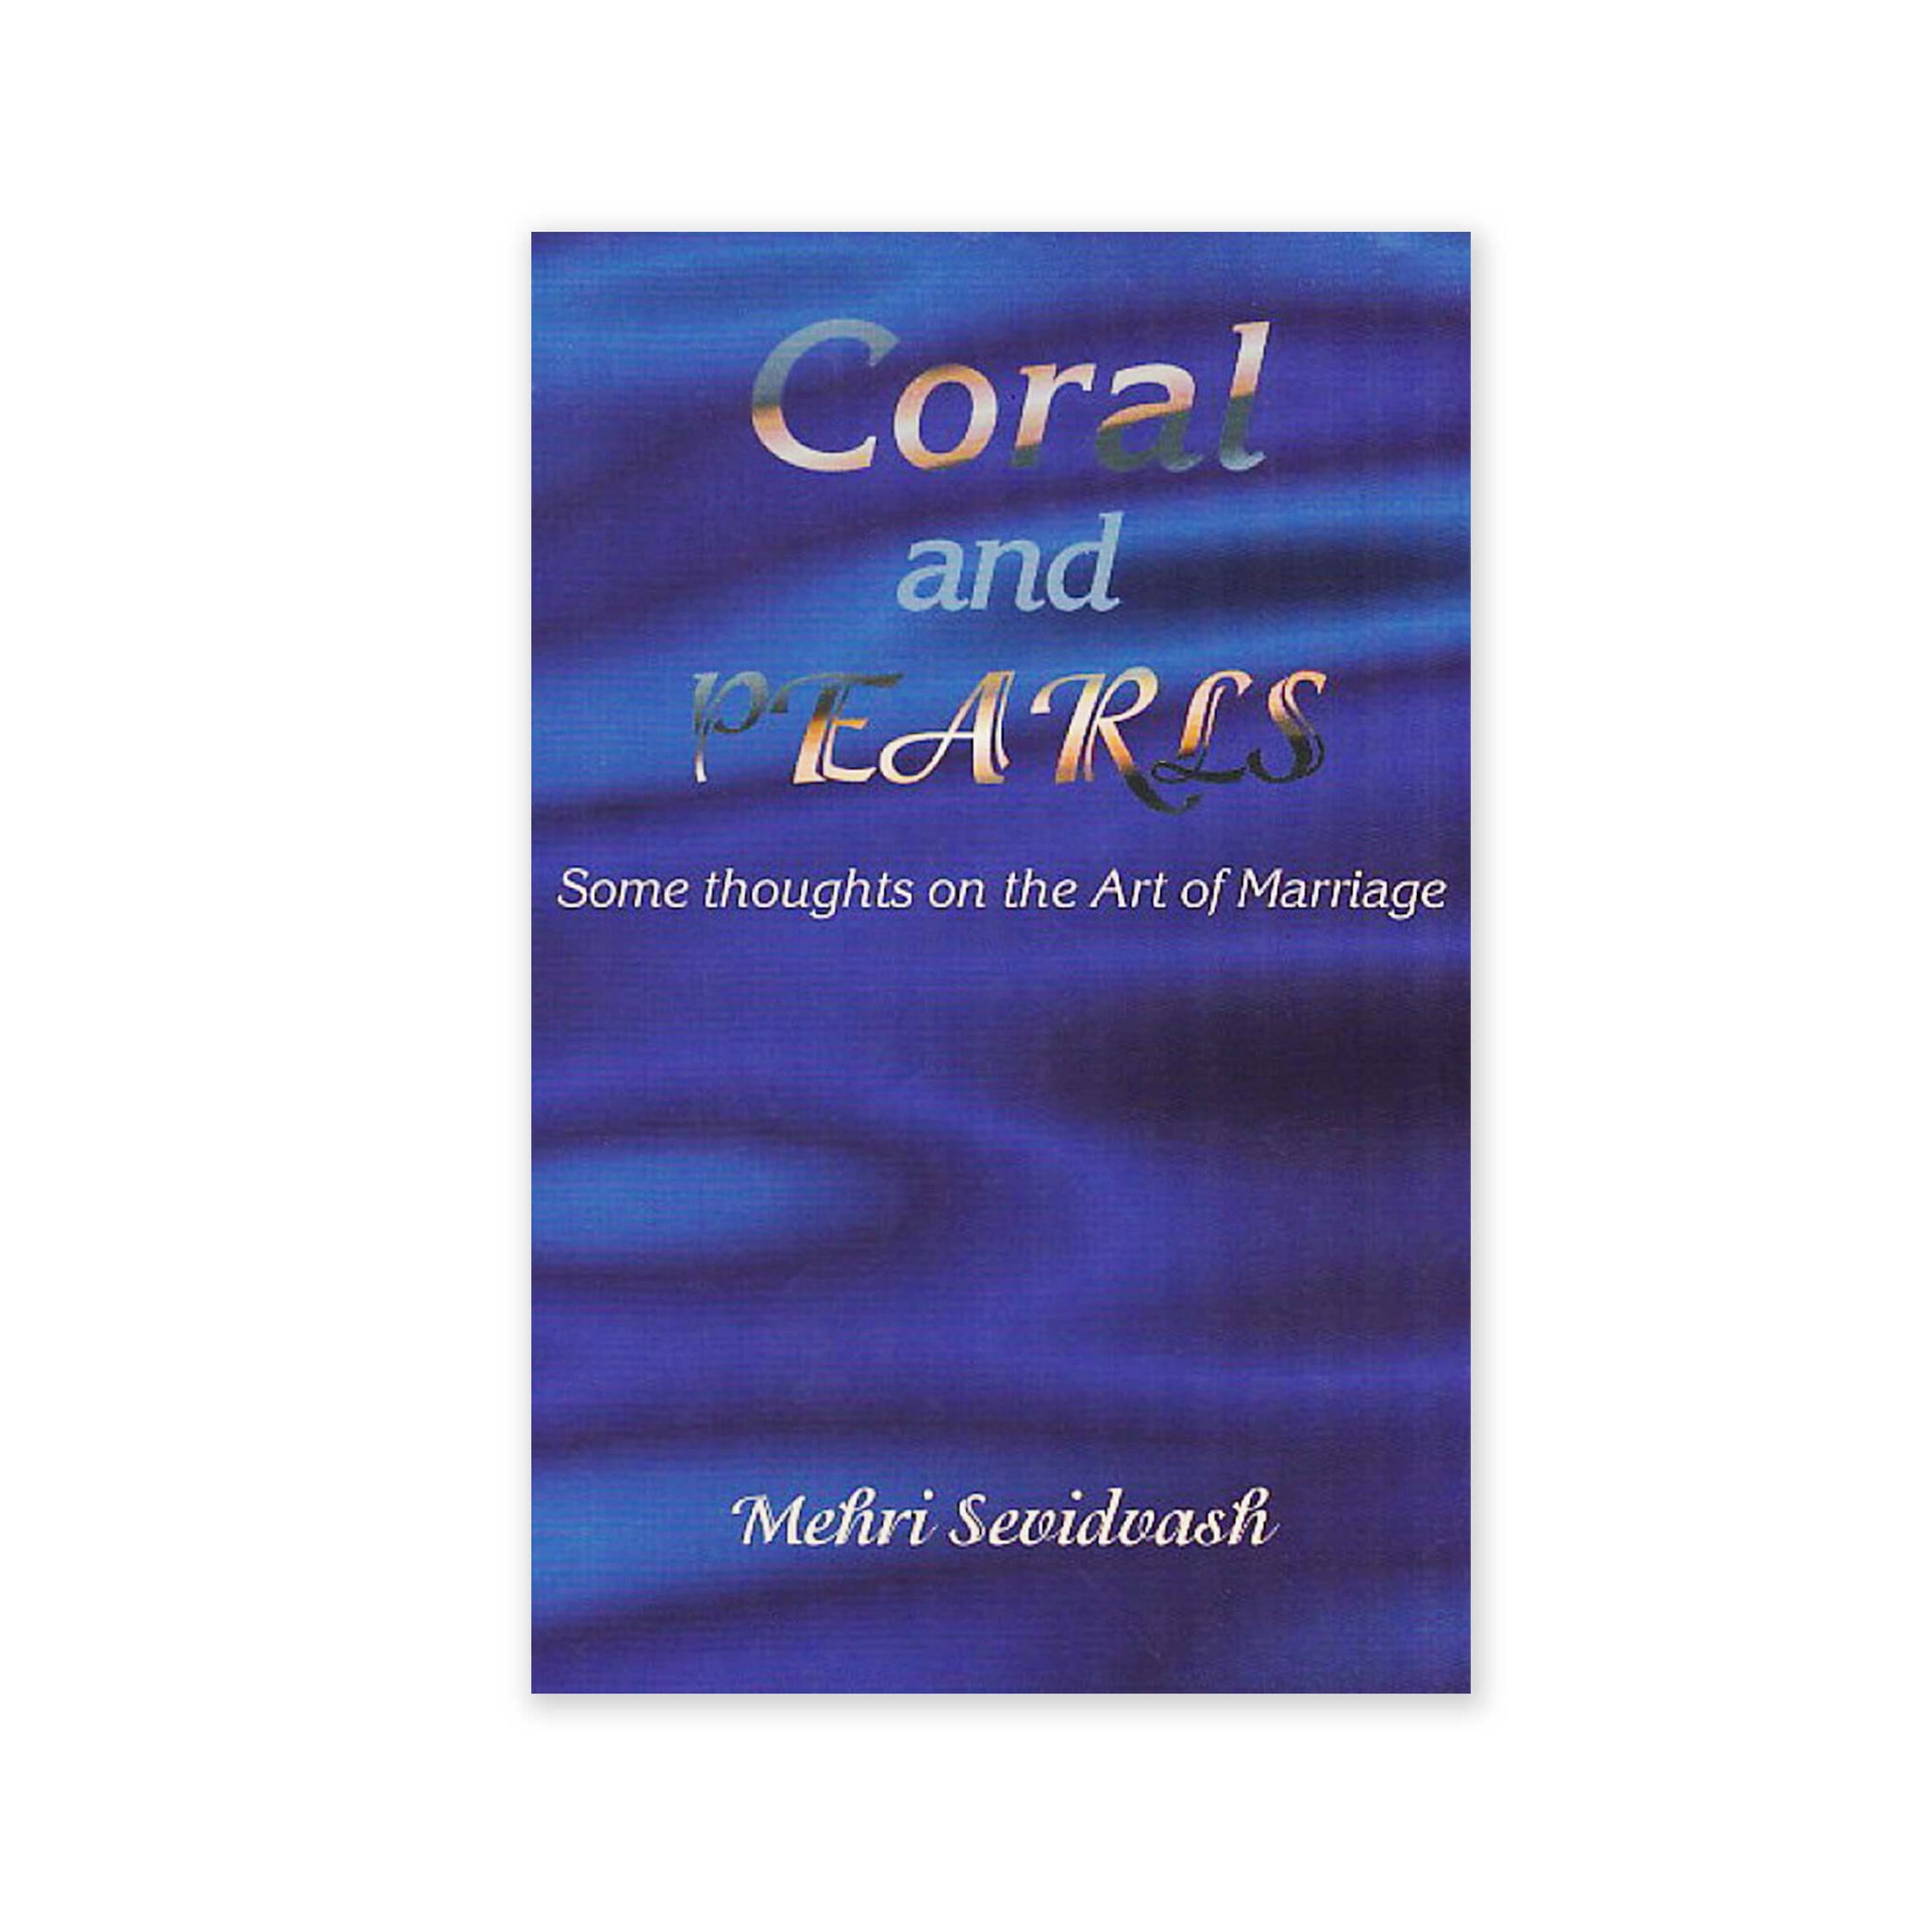 Coral and Pearls - Some Thoughts on the Art of Marriage